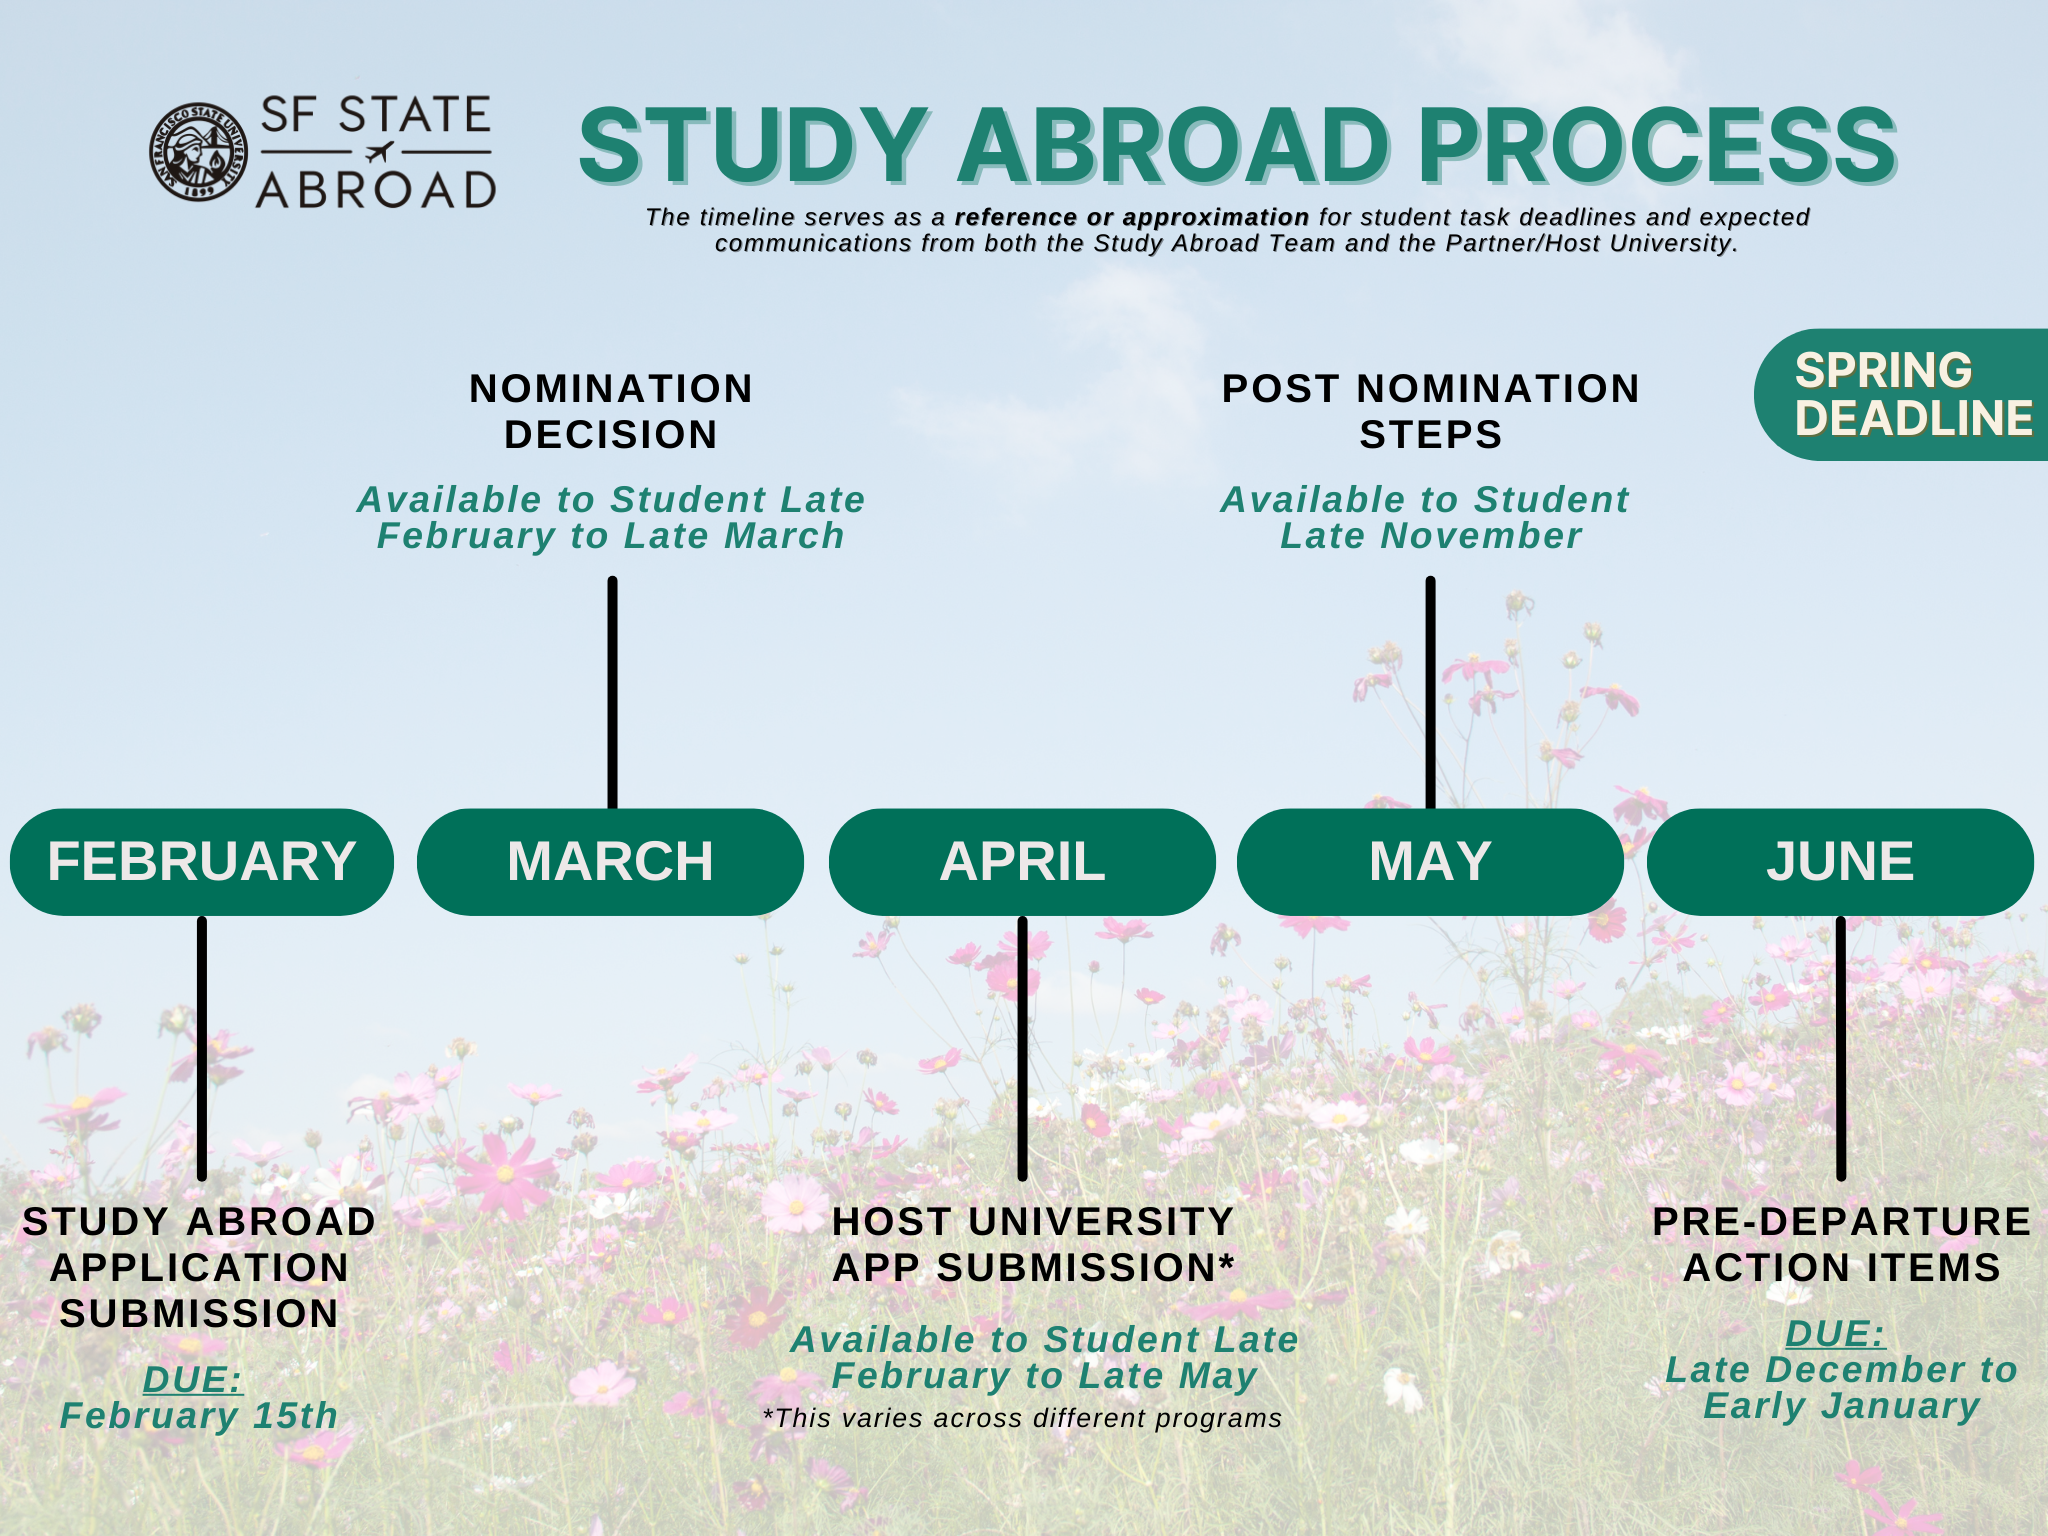 Study Abroad timeline for students trying to go abroad in the Spring/Calendar Year.